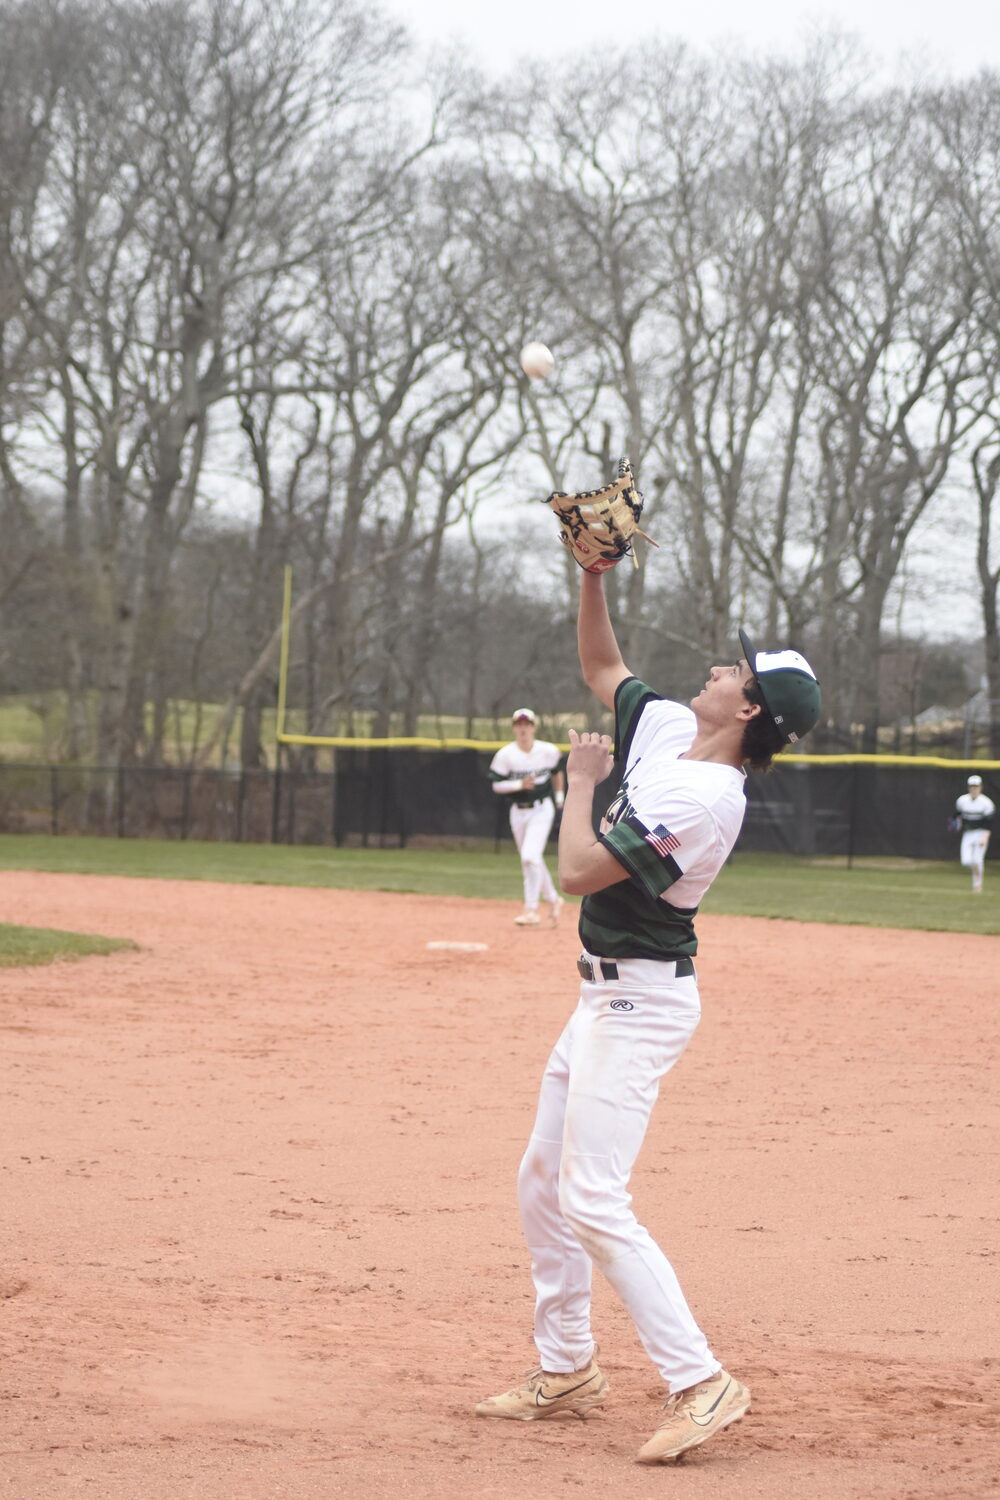 Westhampton Beach first baseman Jude Allen lines up a fly ball in the infield and catches it for an out.   DREW BUDD